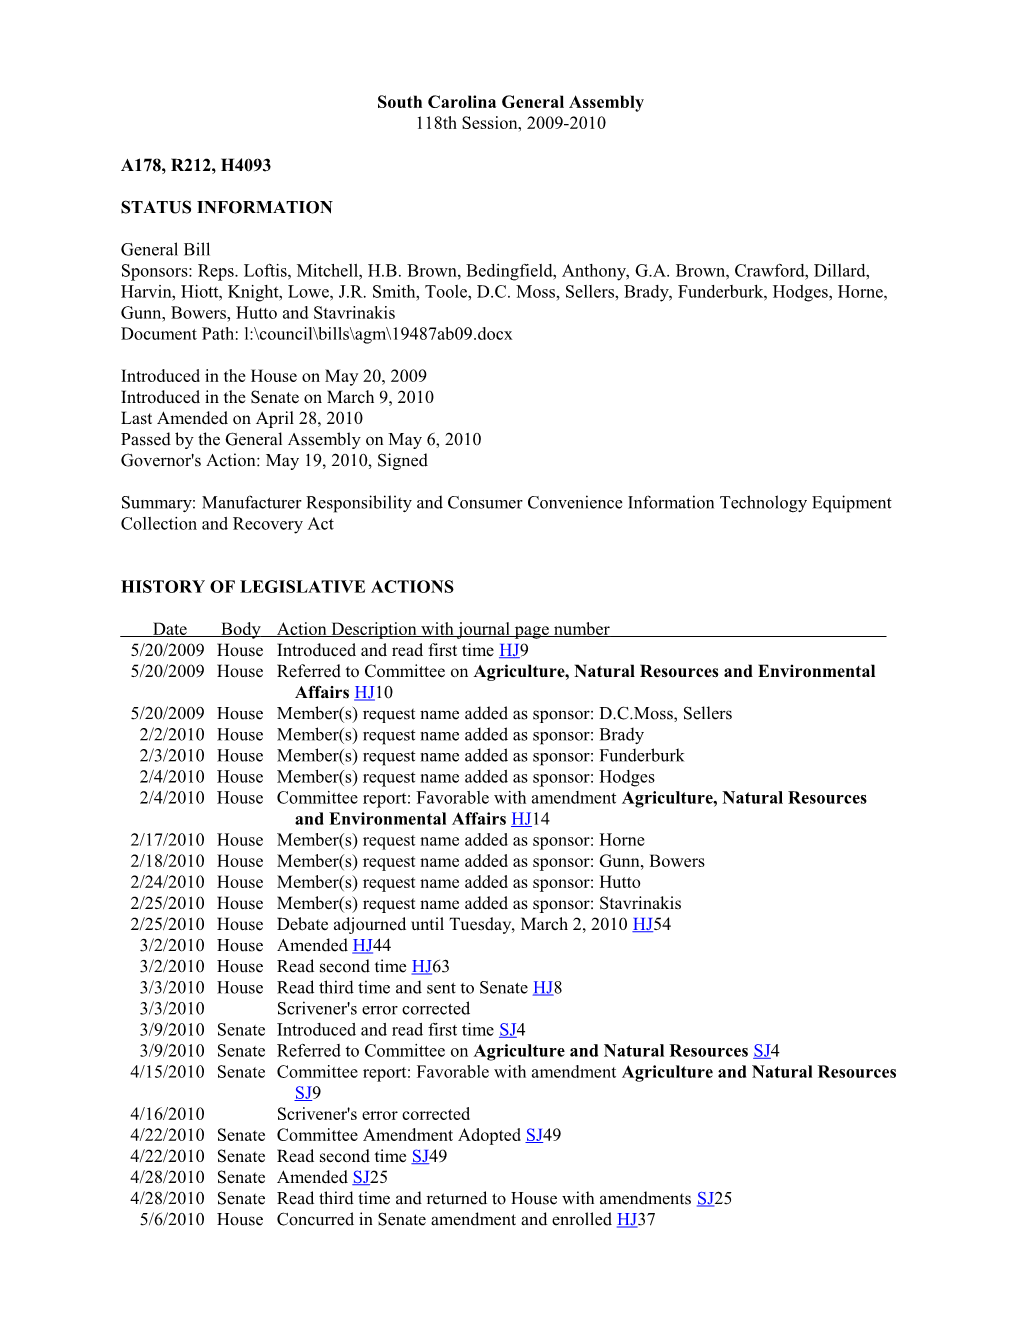 2009-2010 Bill 4093: Manufacturer Responsibility and Consumer Convenience Information Technology